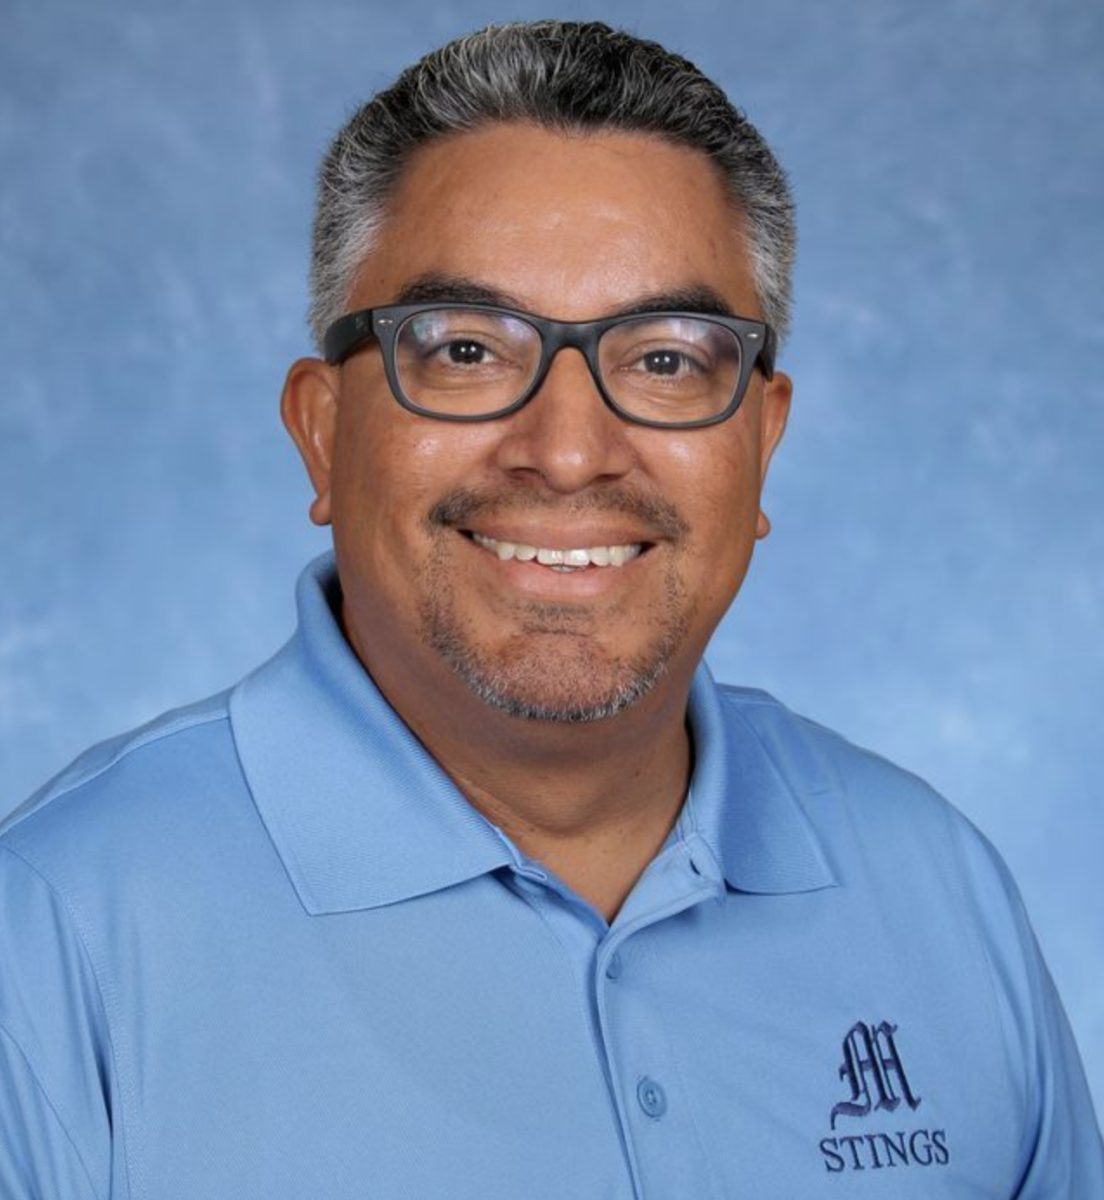 Mr. Lacayos official picture for the Miami Senior High website